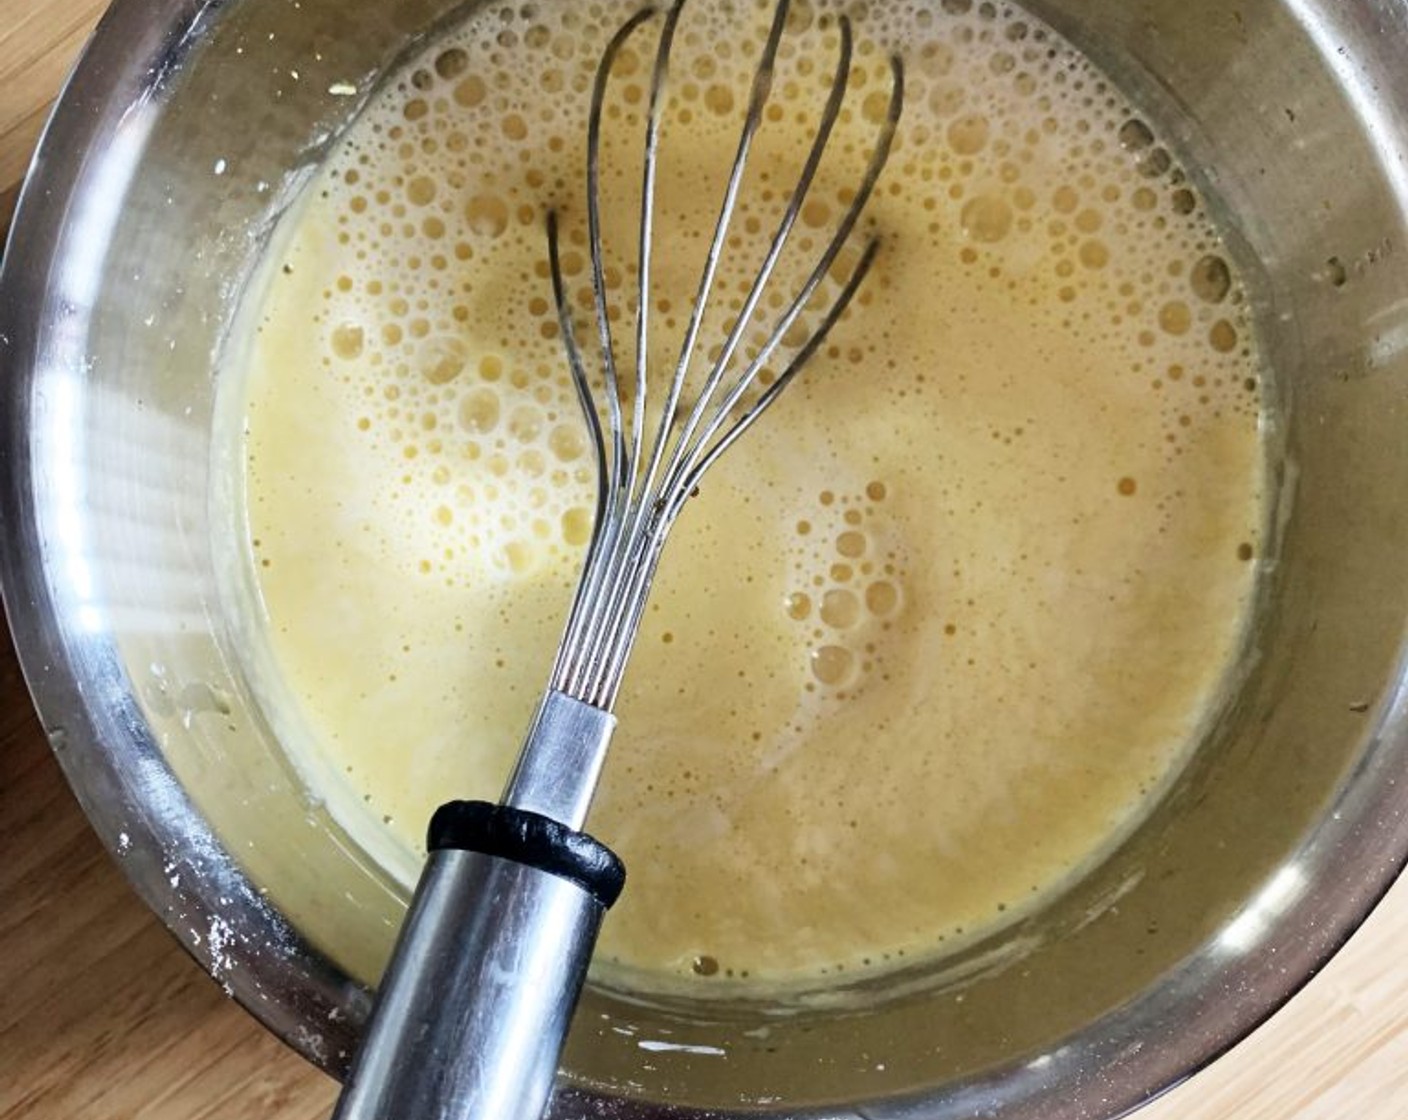 step 3 Next squeeze in the juice of an orange and slowly pour in the Oat Milk (1 2/3 cups), whisking constantly.